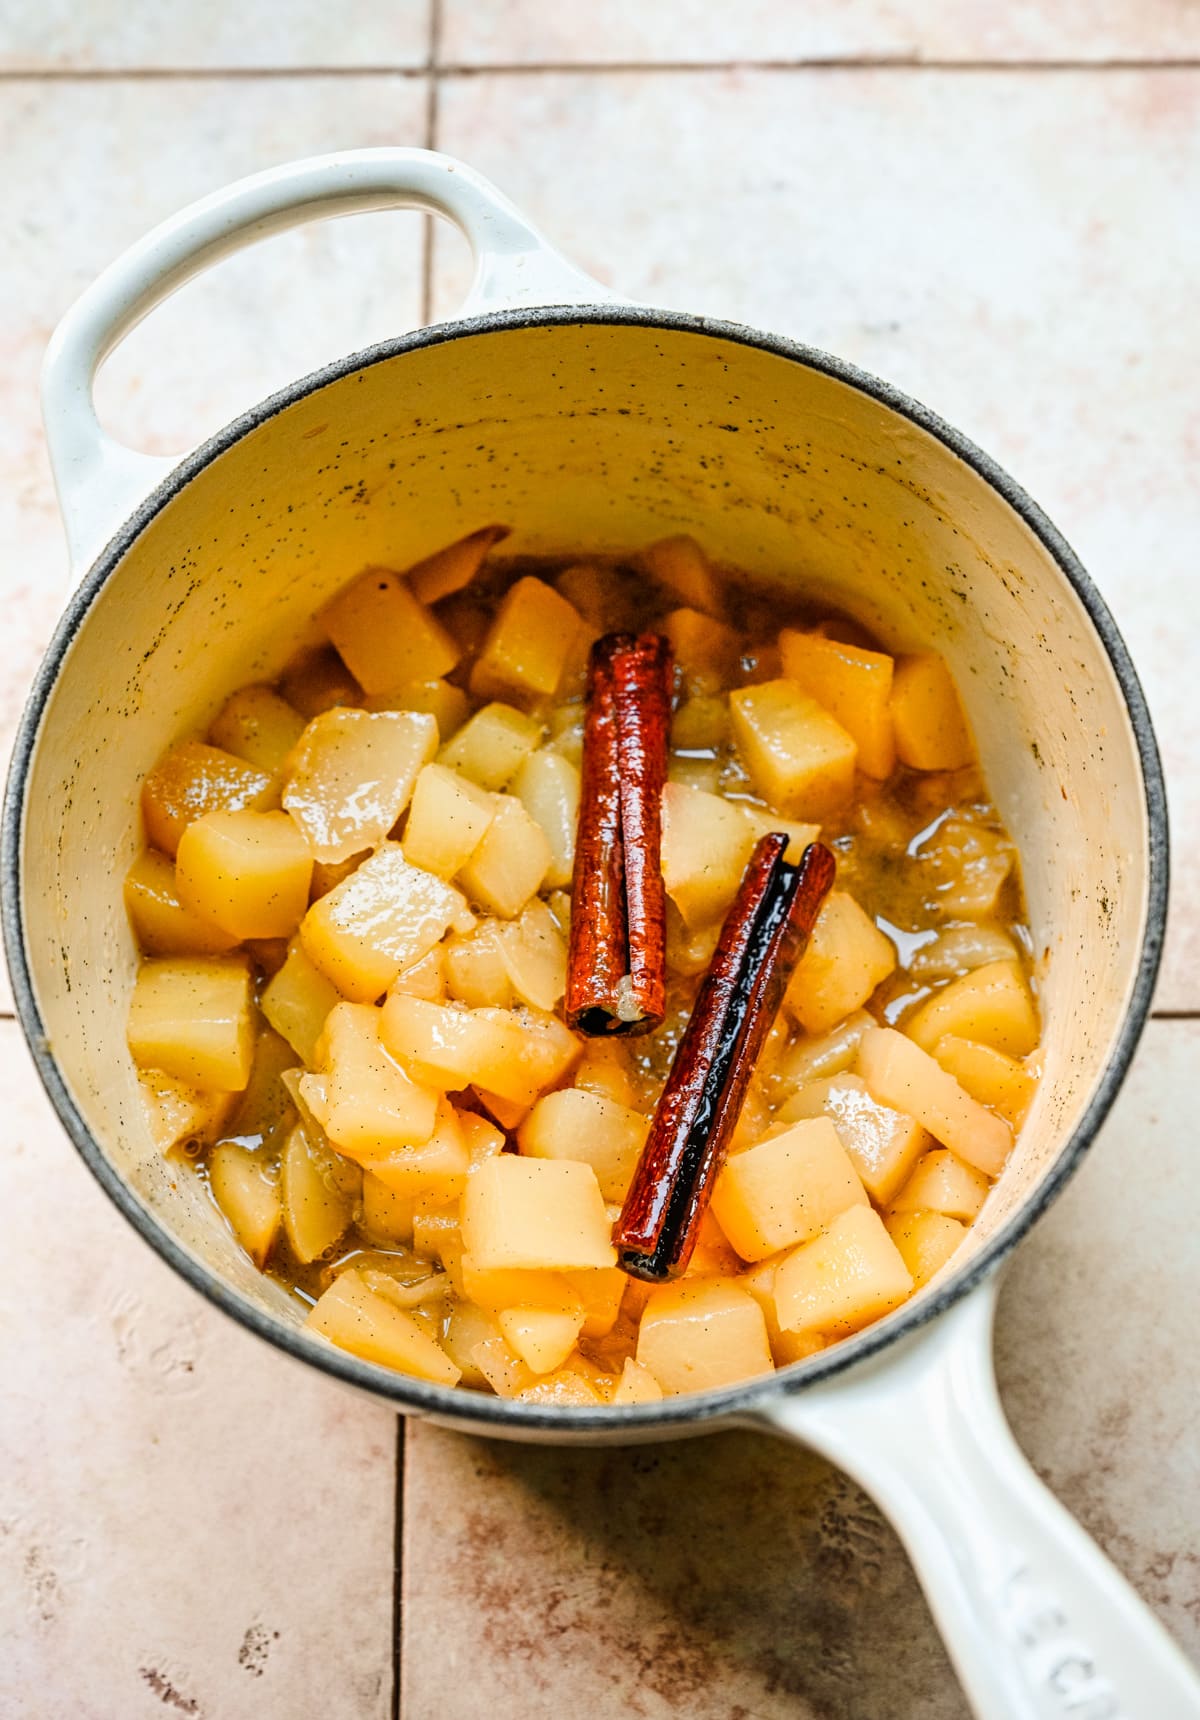 Overhead view of stewed pears in a pot with cinnamon sticks on top.